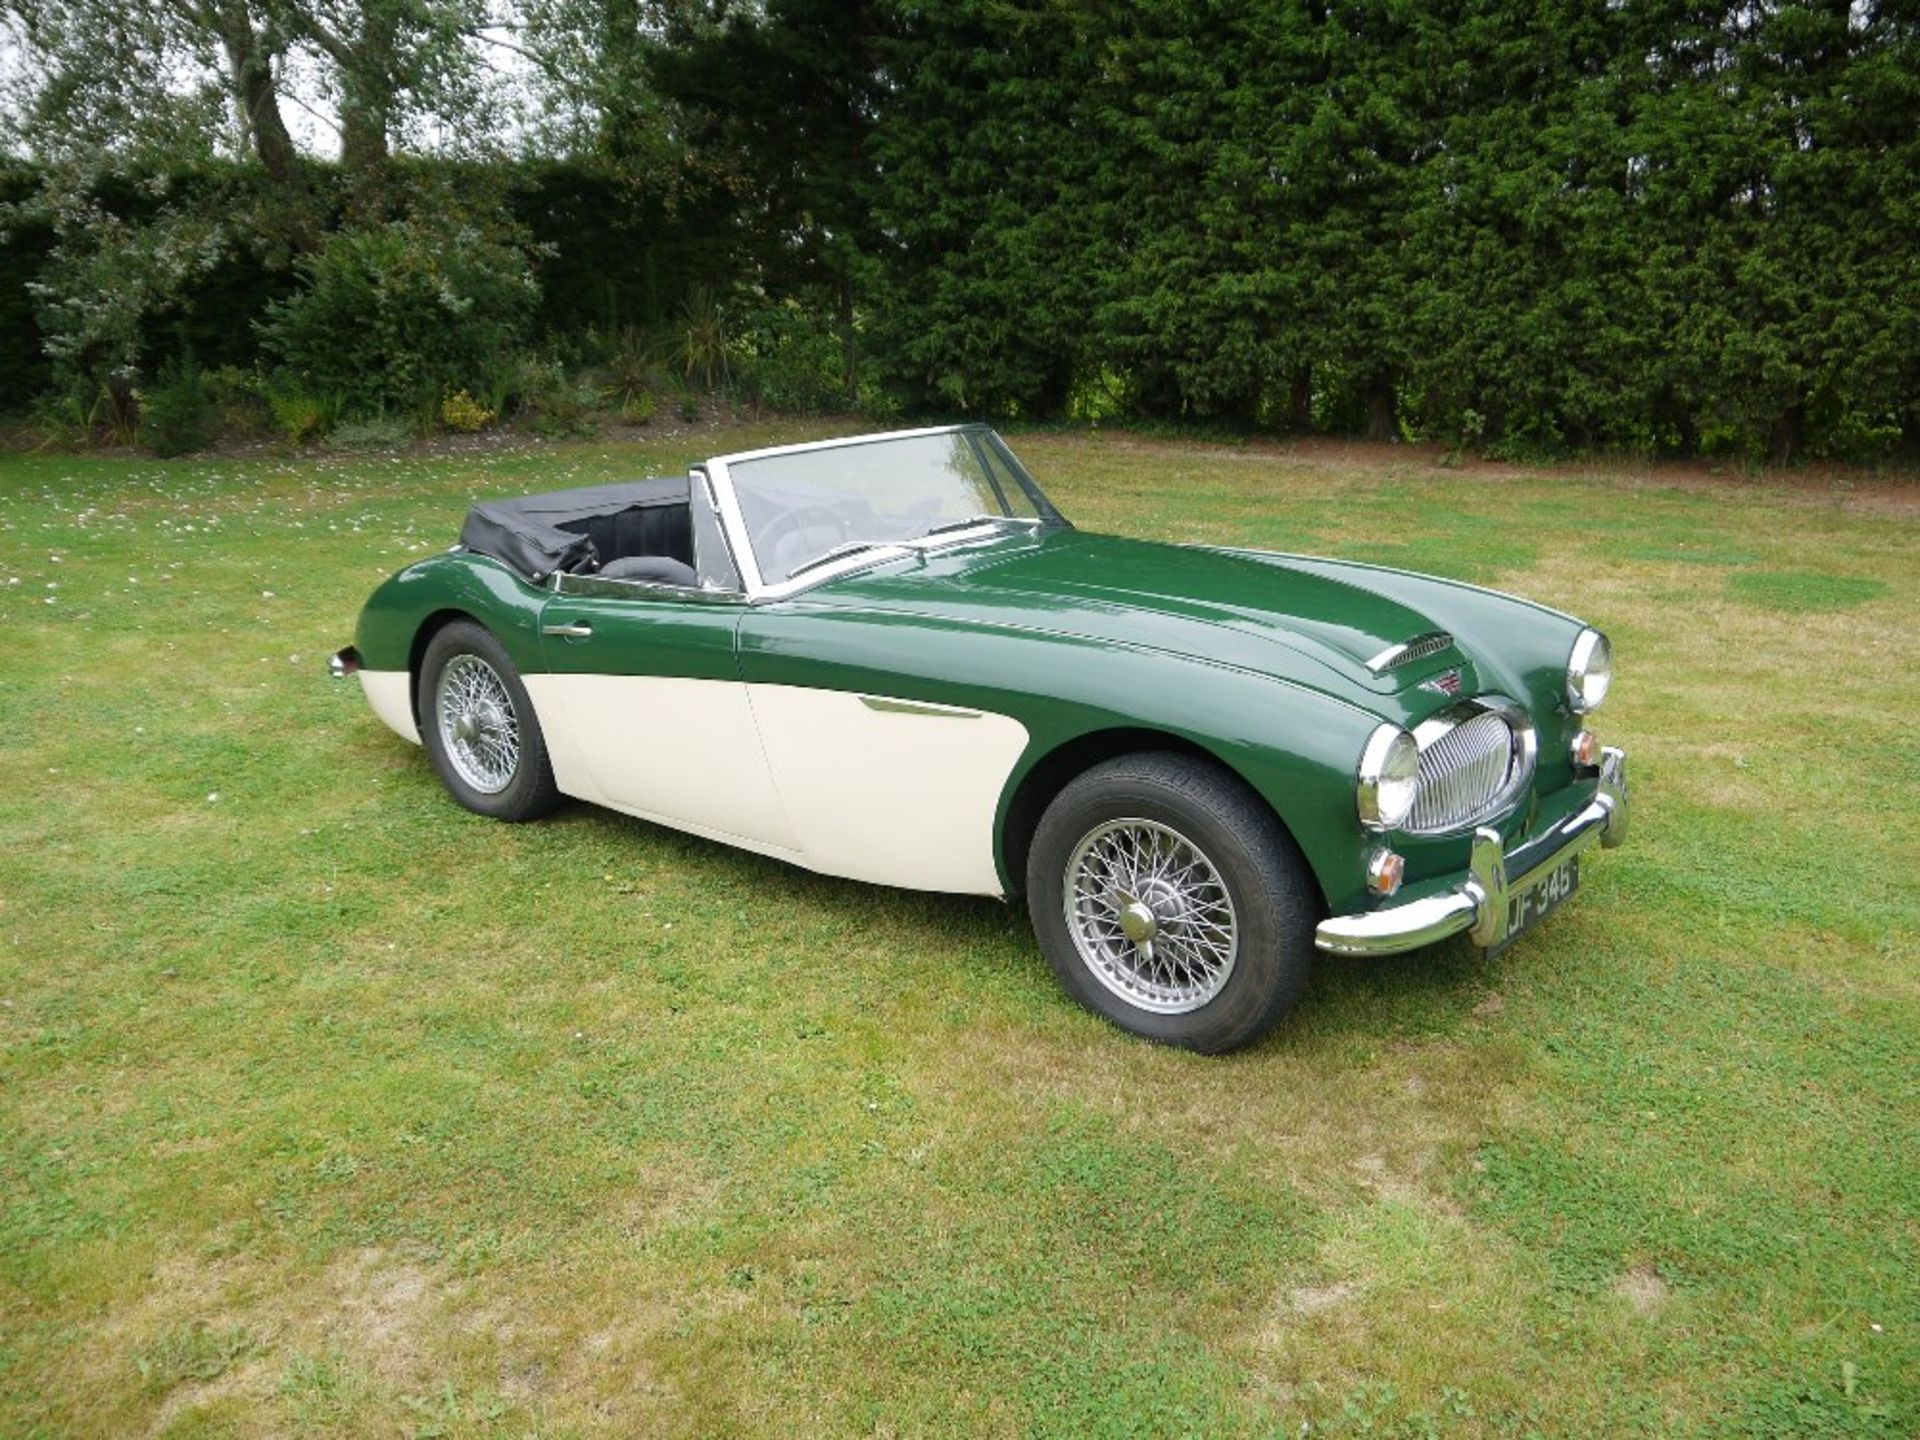 1963 AUSTIN-HEALEY 3000 MARK II Registration Number: MJF 346 Chassis Number: H-BJ7-24376 Recorded